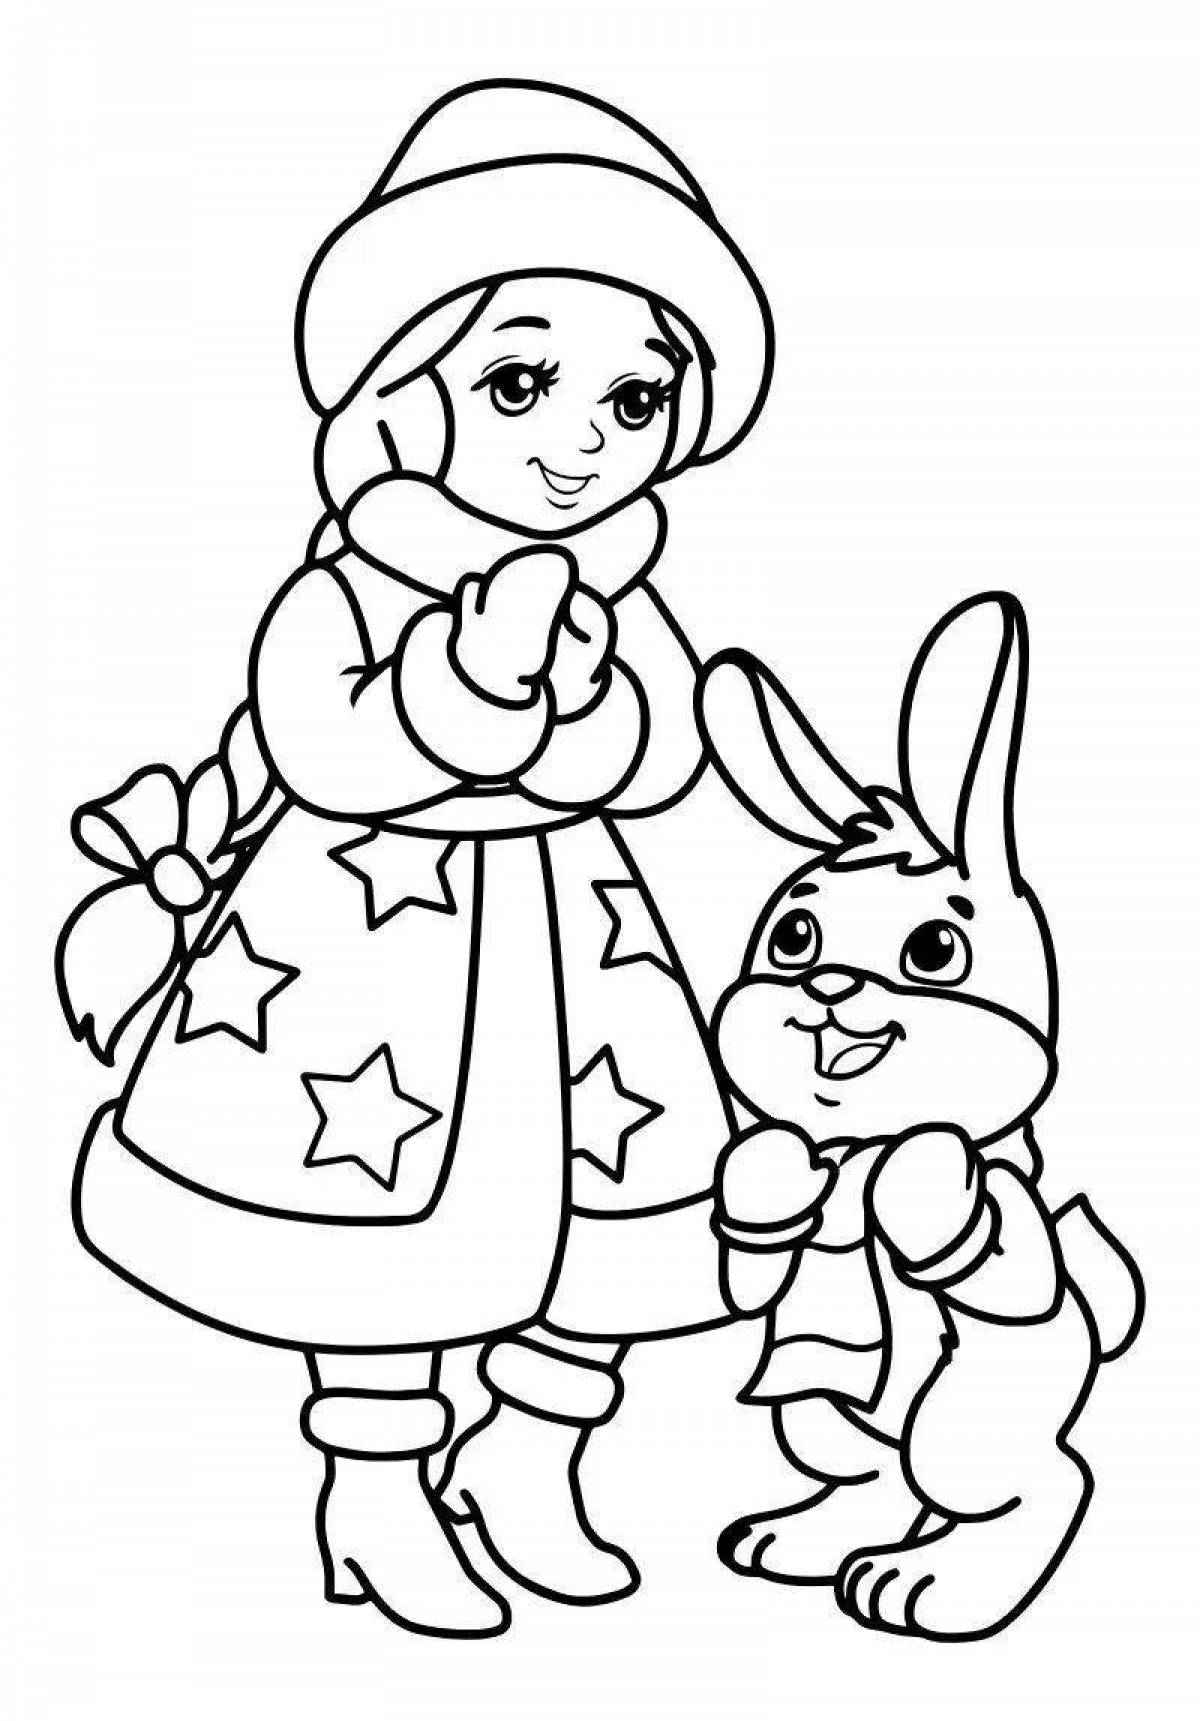 Playful hare and tree coloring page